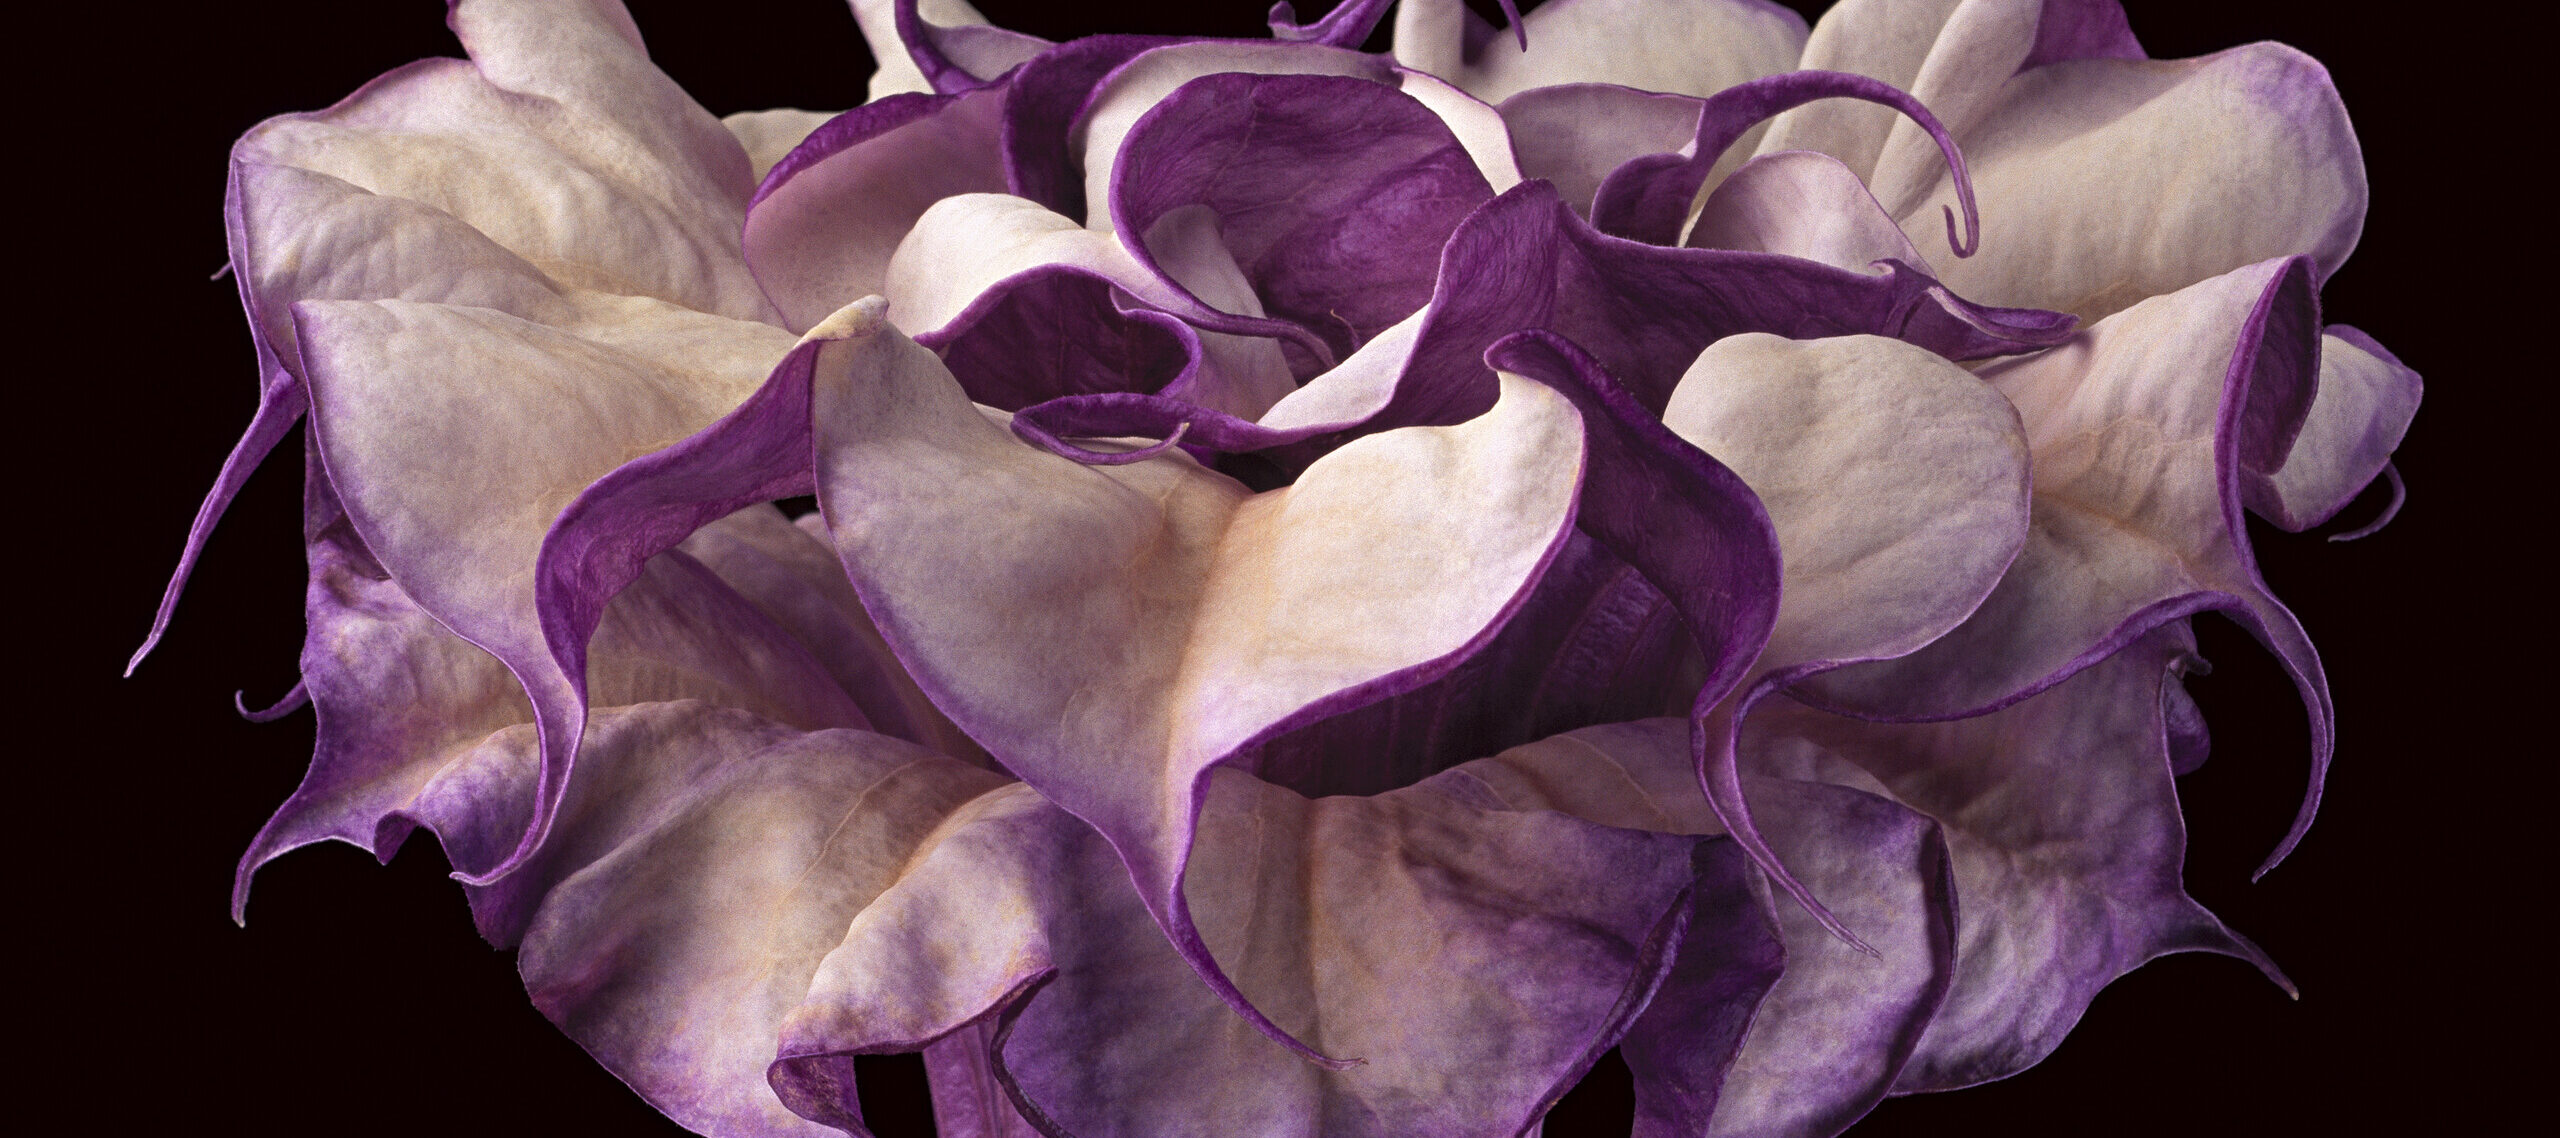 Close-up photograph shows a trumpet-shaped flower against a dark black background. The flower's striated, long neck erupts in a profusion of purple and white petals that dominate the composition.